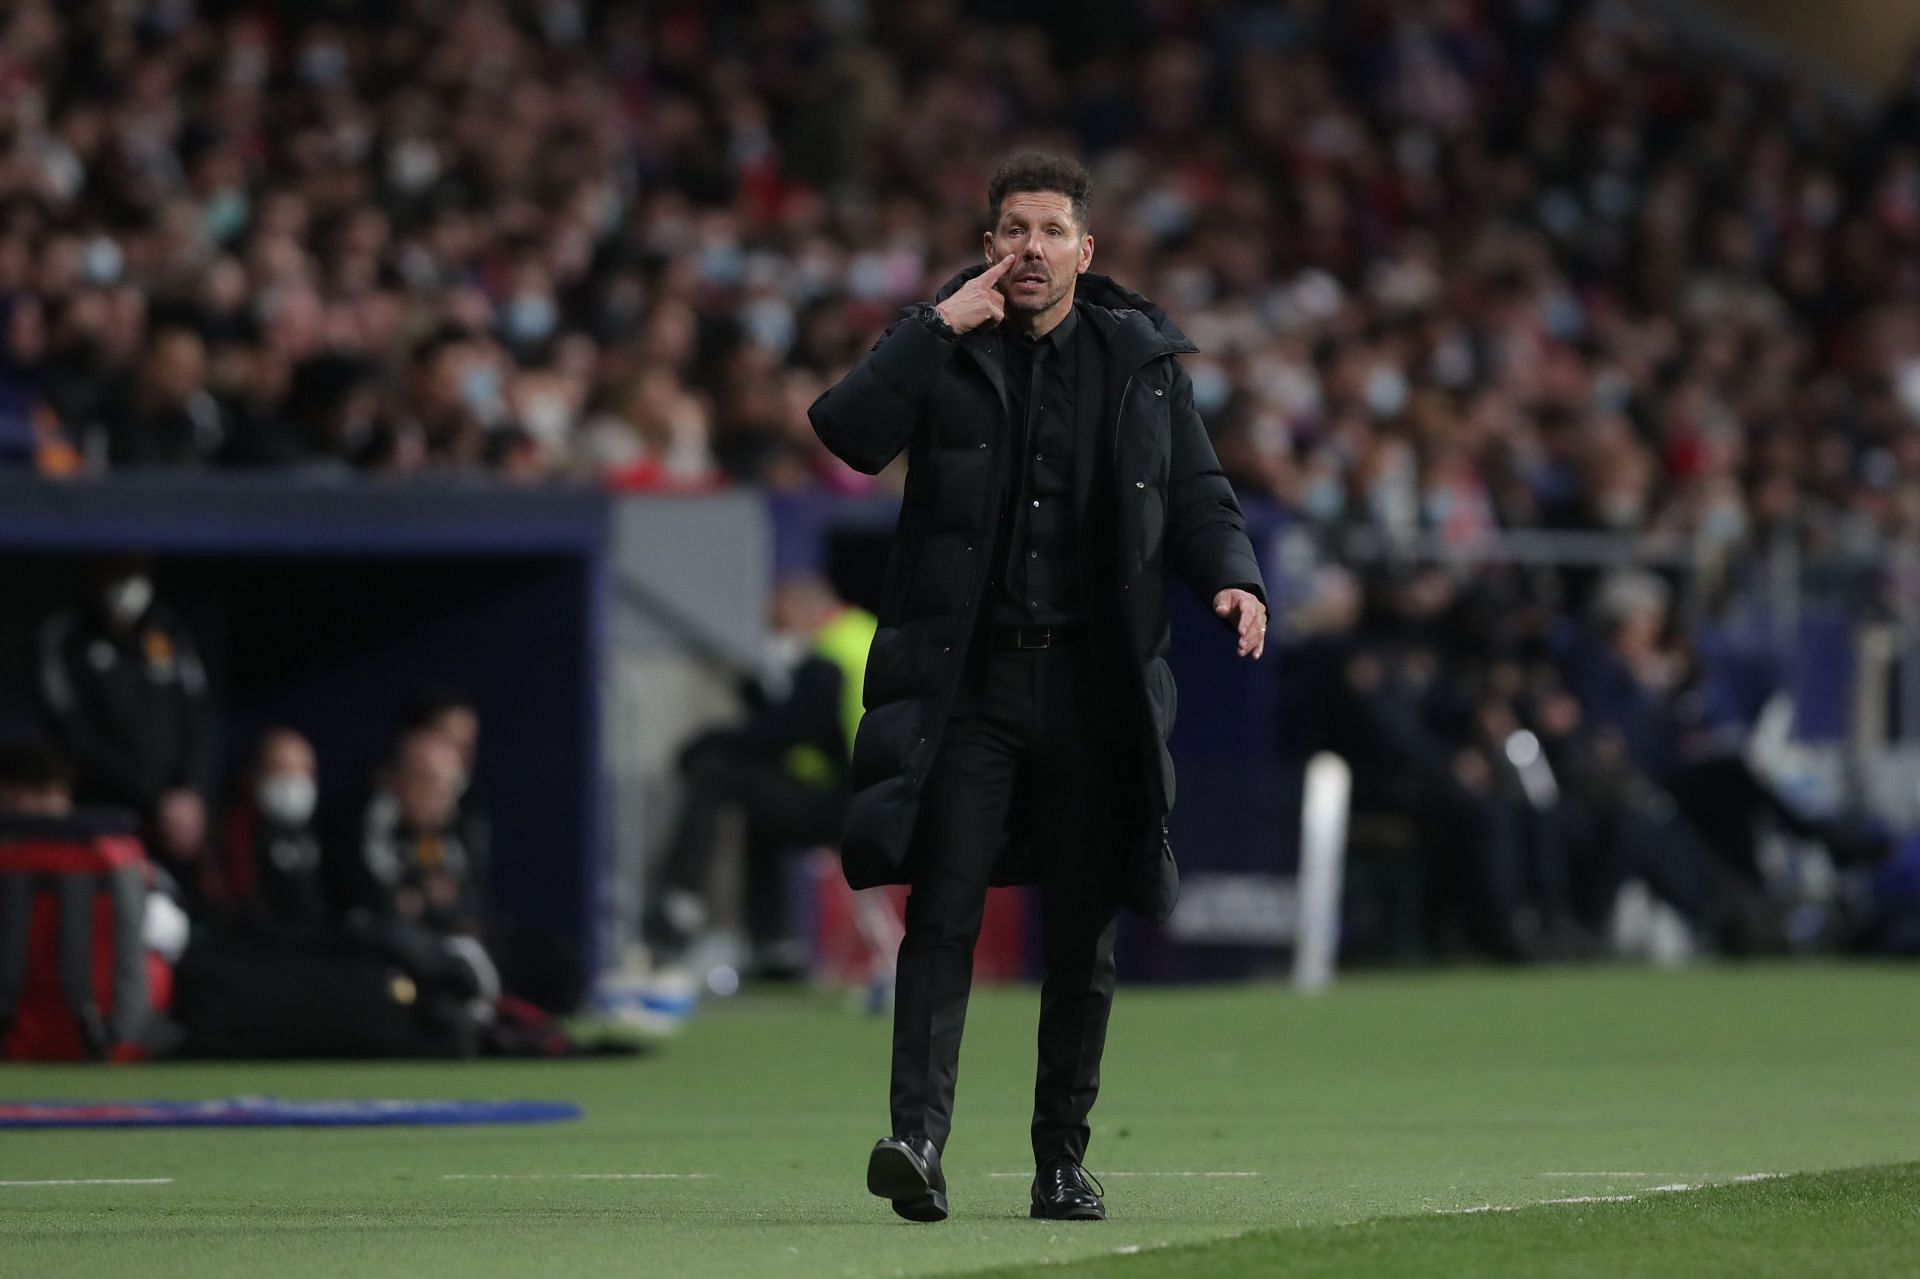 Diego Simeone has transformed Atletico Madrid since taking charge.